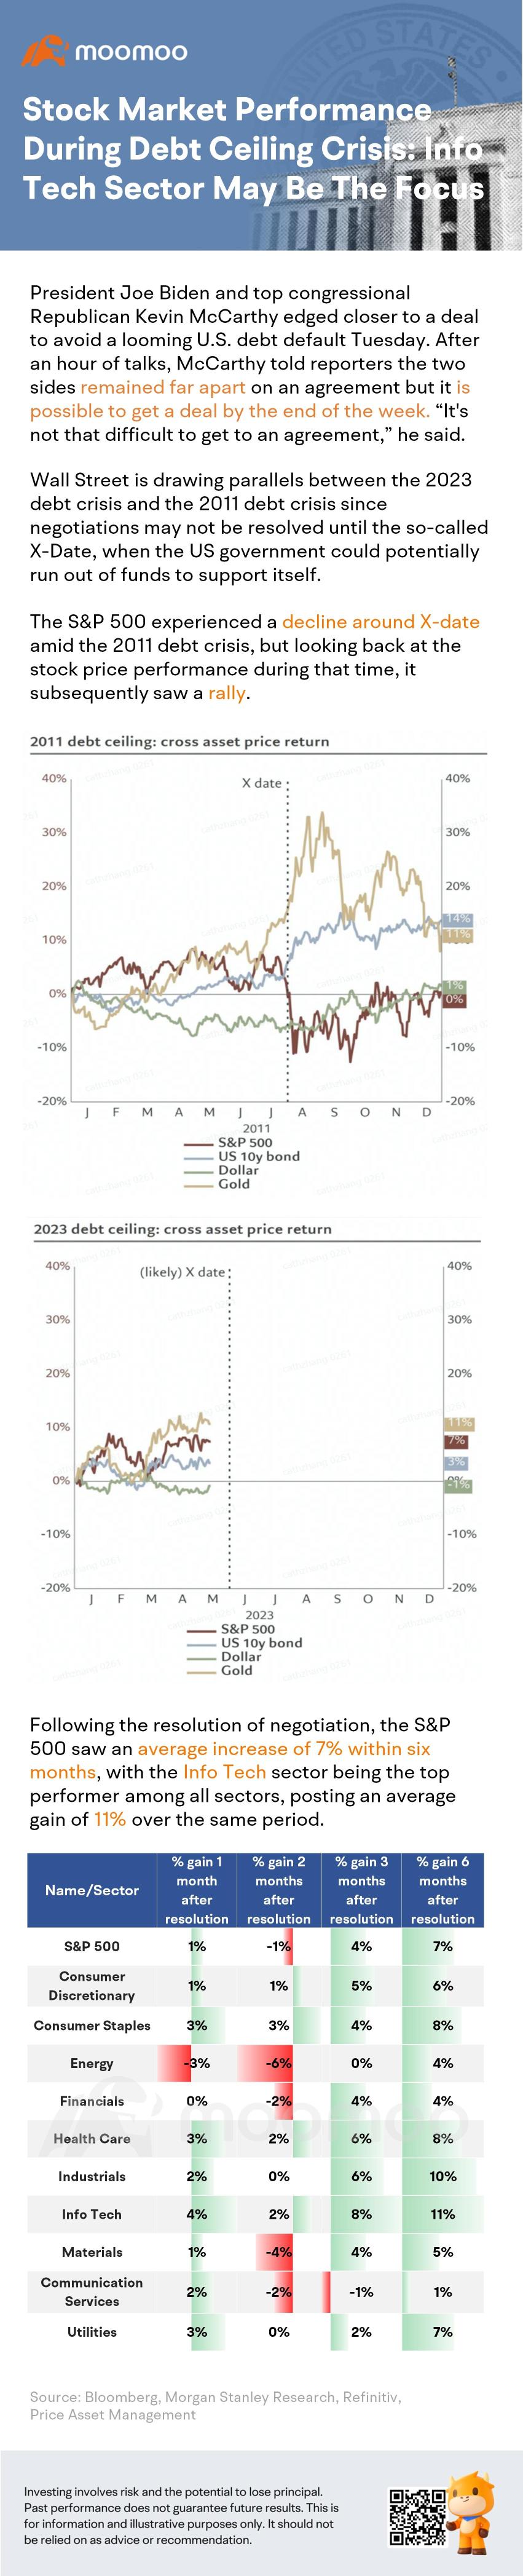 Stock Market Performance During Debt Ceiling Crisis: Info Tech Sector May Be The Focus